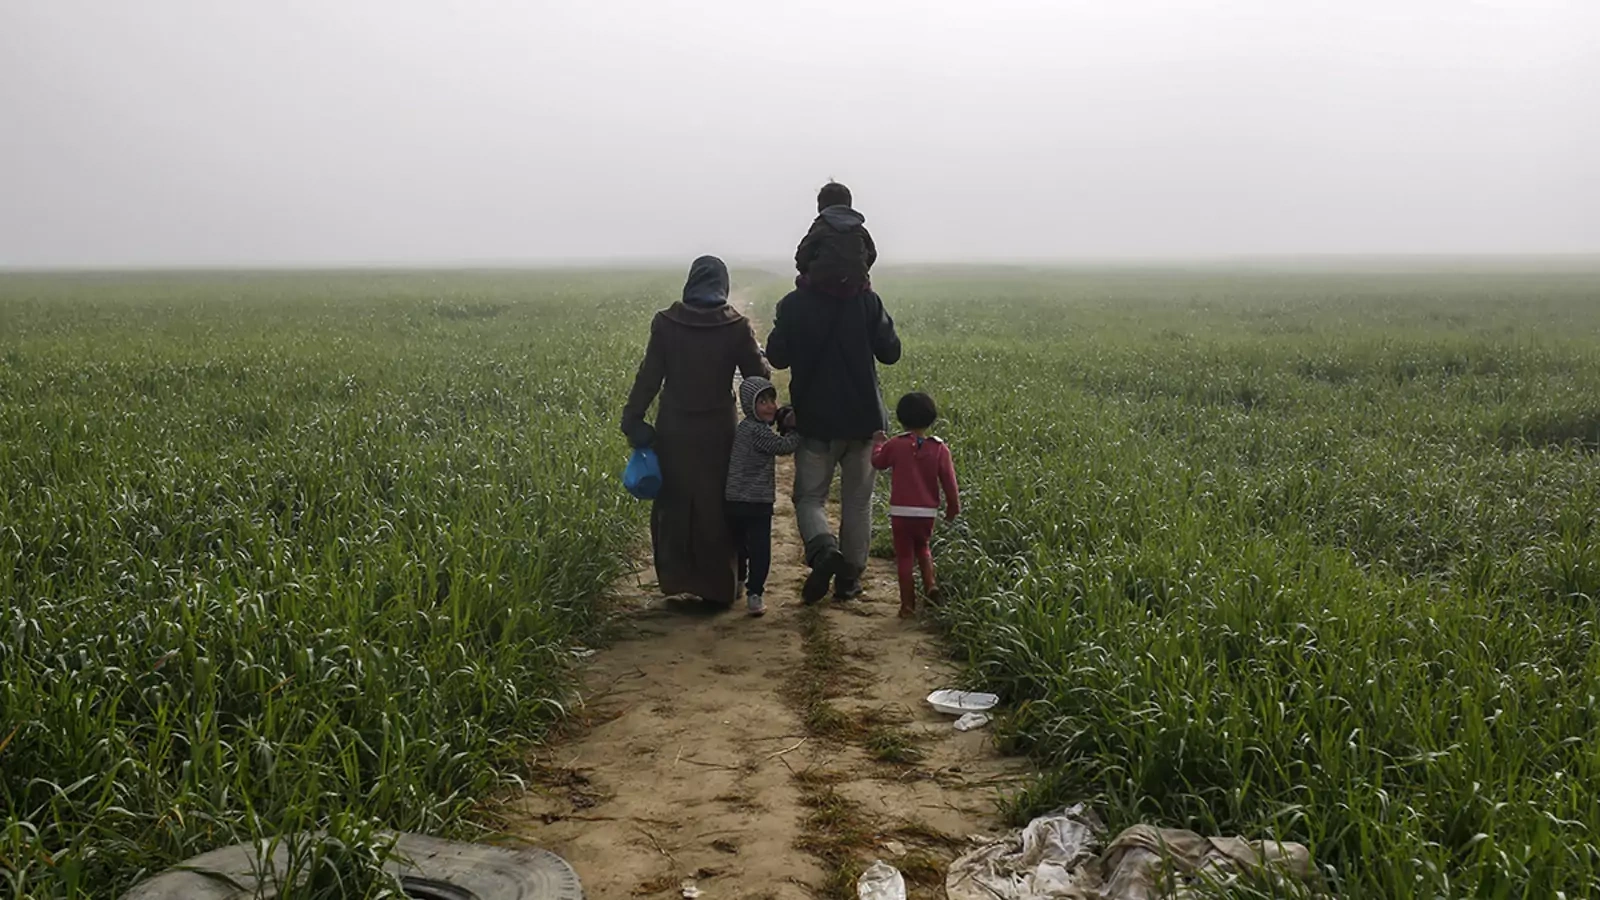 A family walks through a camp for migrants and refugees outside Idomeni, Greece, along the border with Macedonia, in 2016.